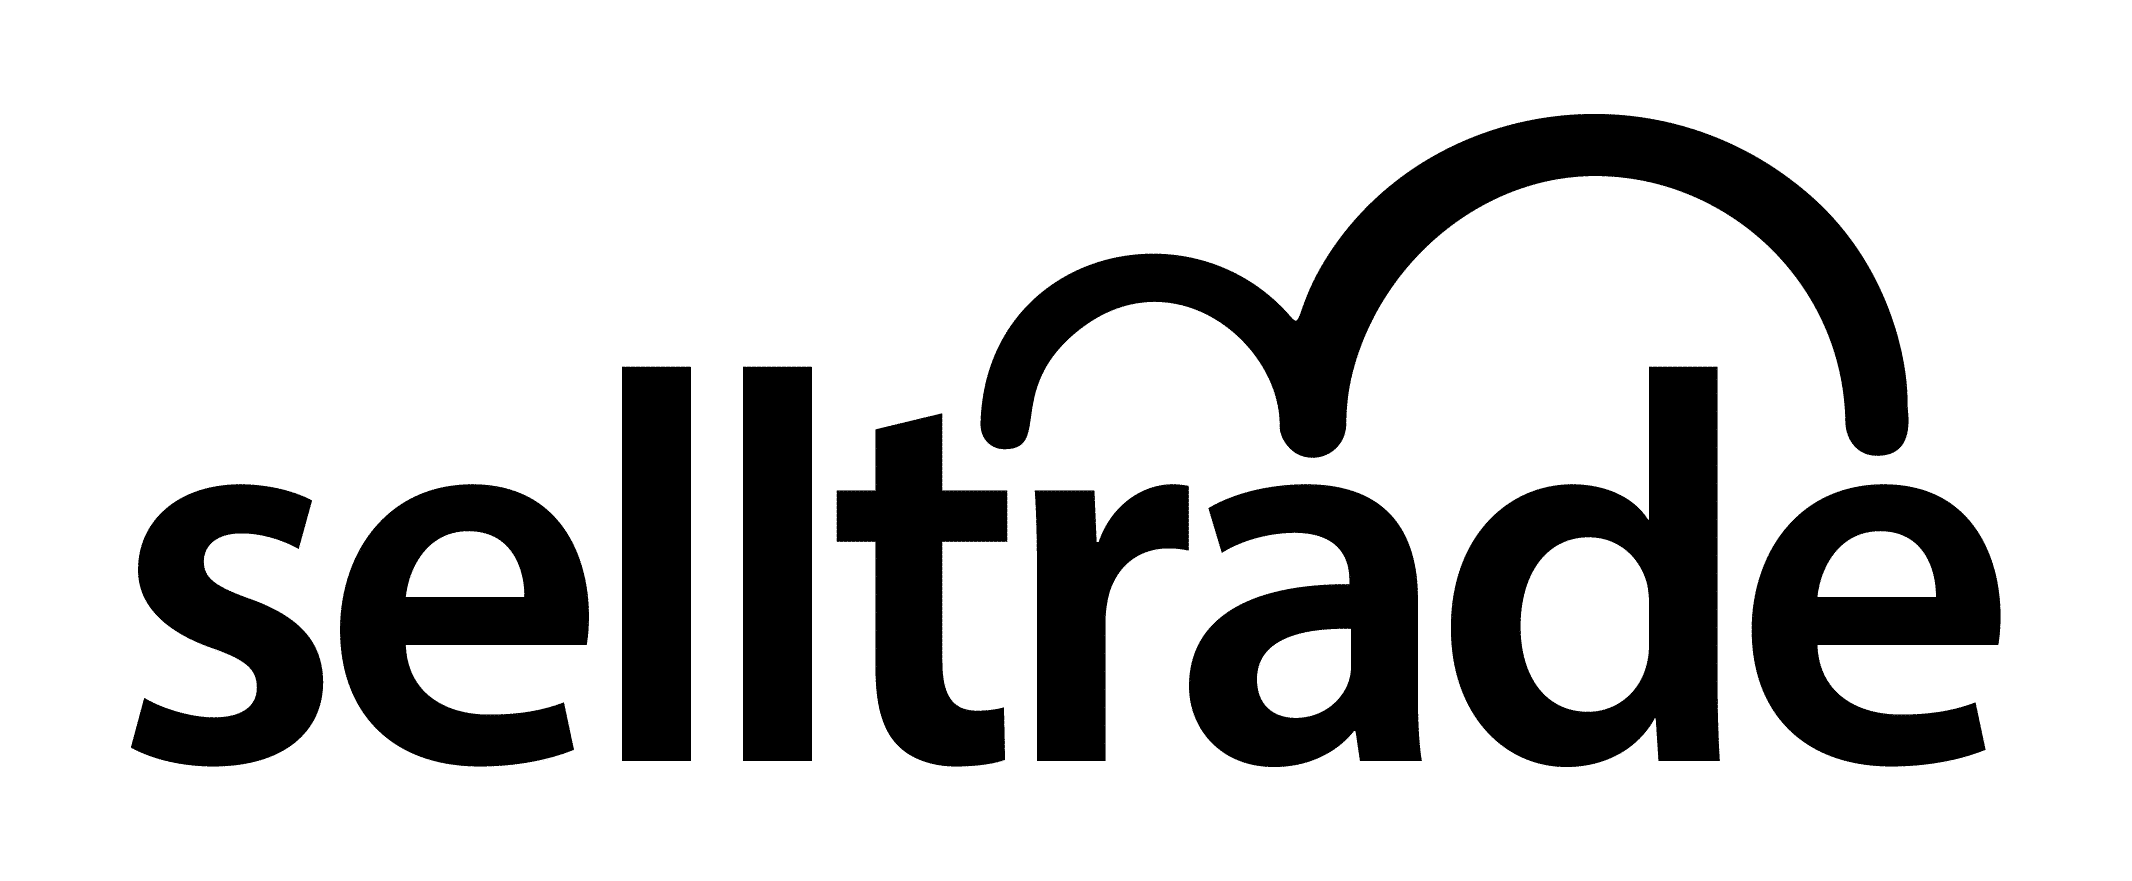 The selltrade logo on a green background.